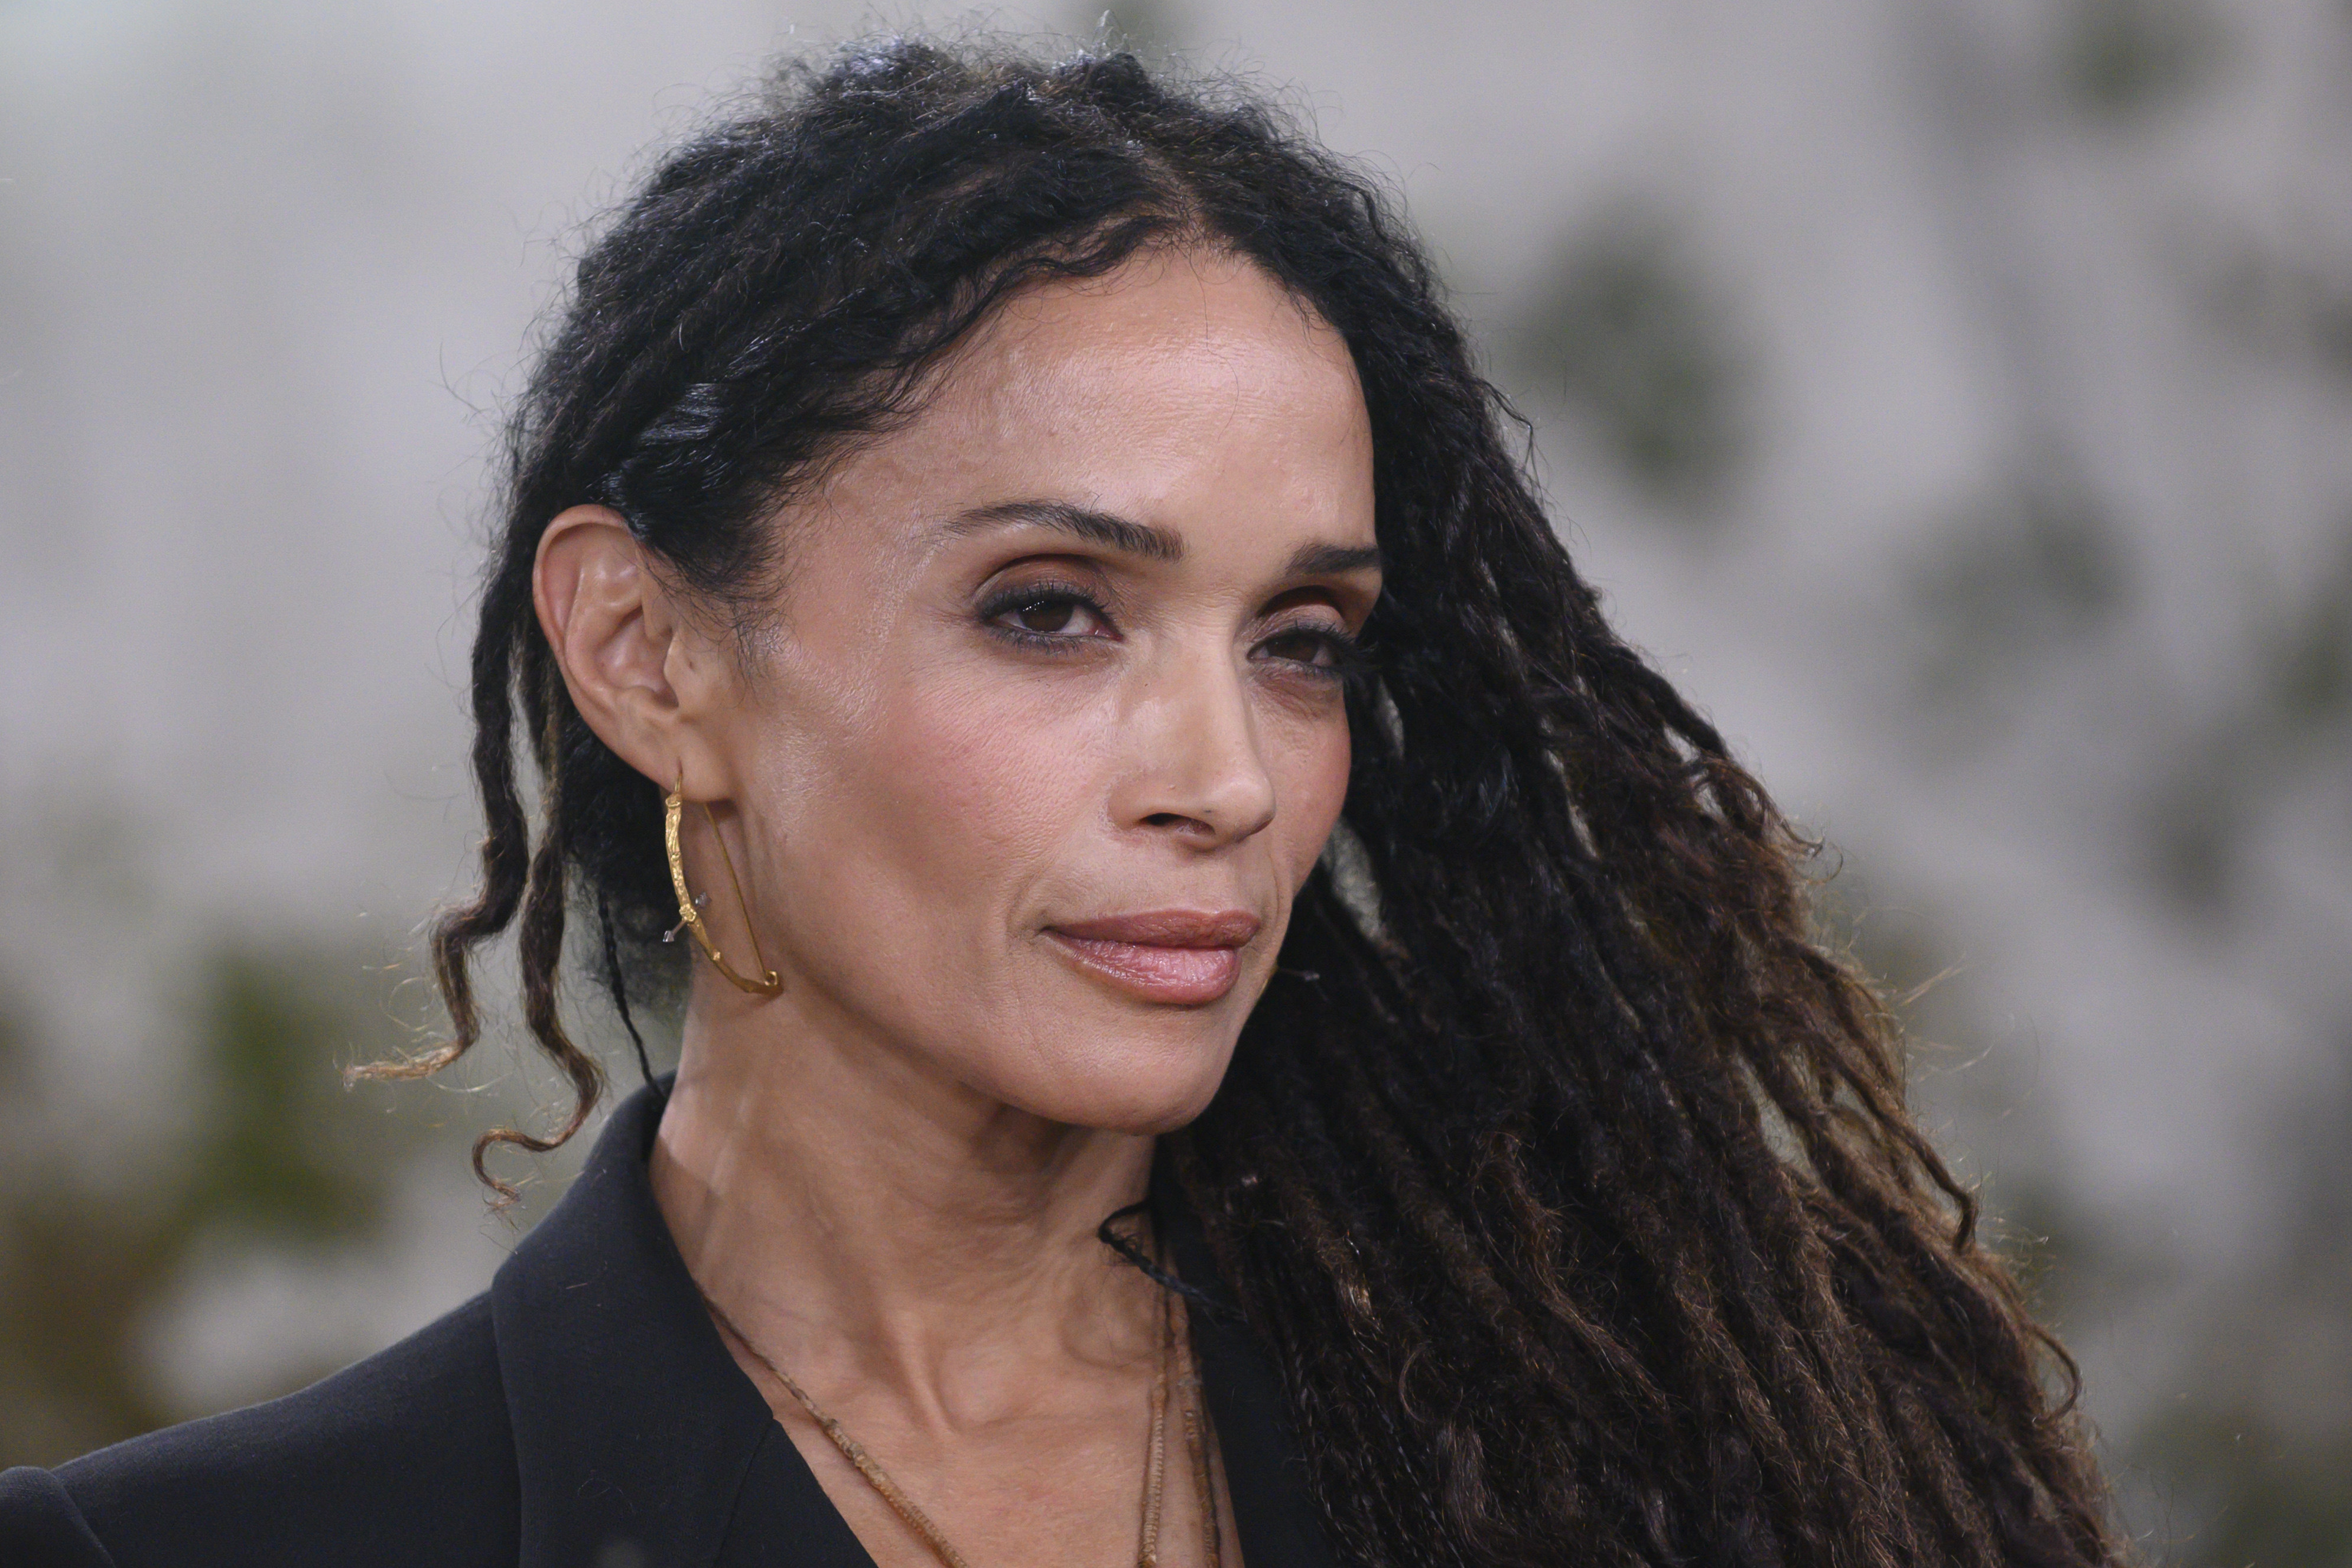 Lisa Bonet arrives for the world premiere of "SEE" at the Fox Regency Village Theater on October 21, 2019 in Los Angeles. | Source: Getty Images